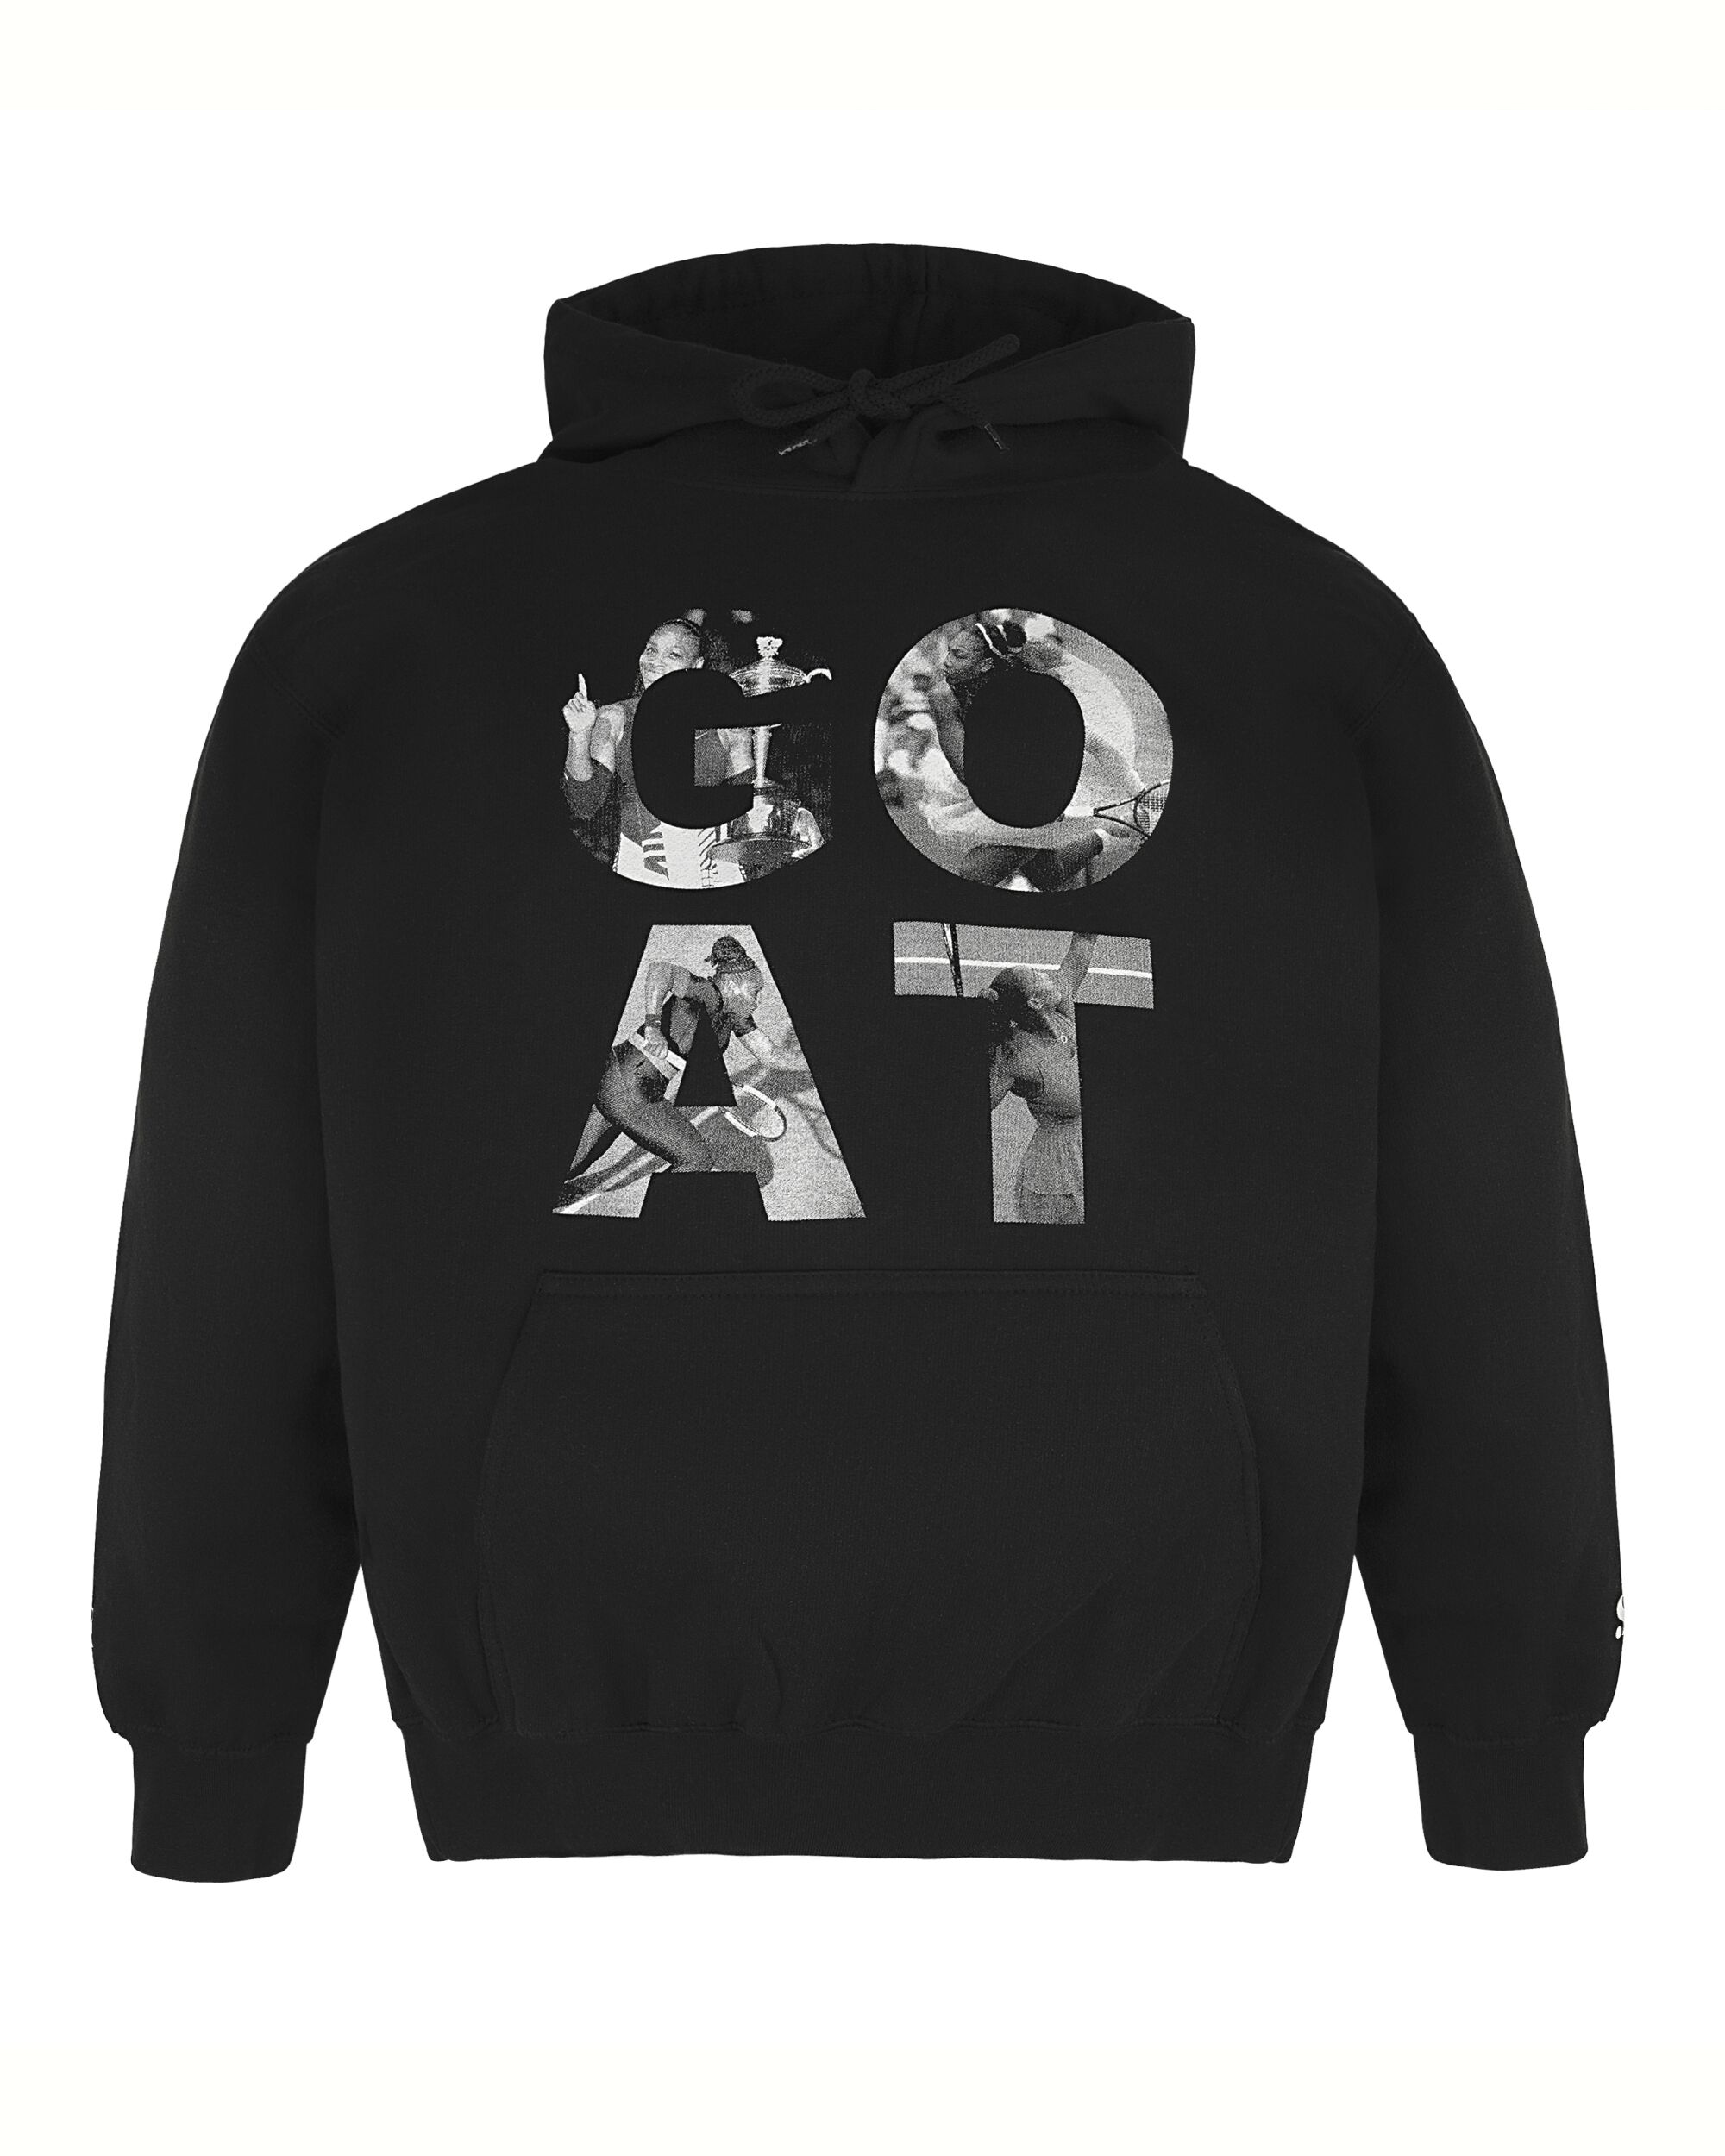 GOAT unisex pullover hoodie by S by Serena 